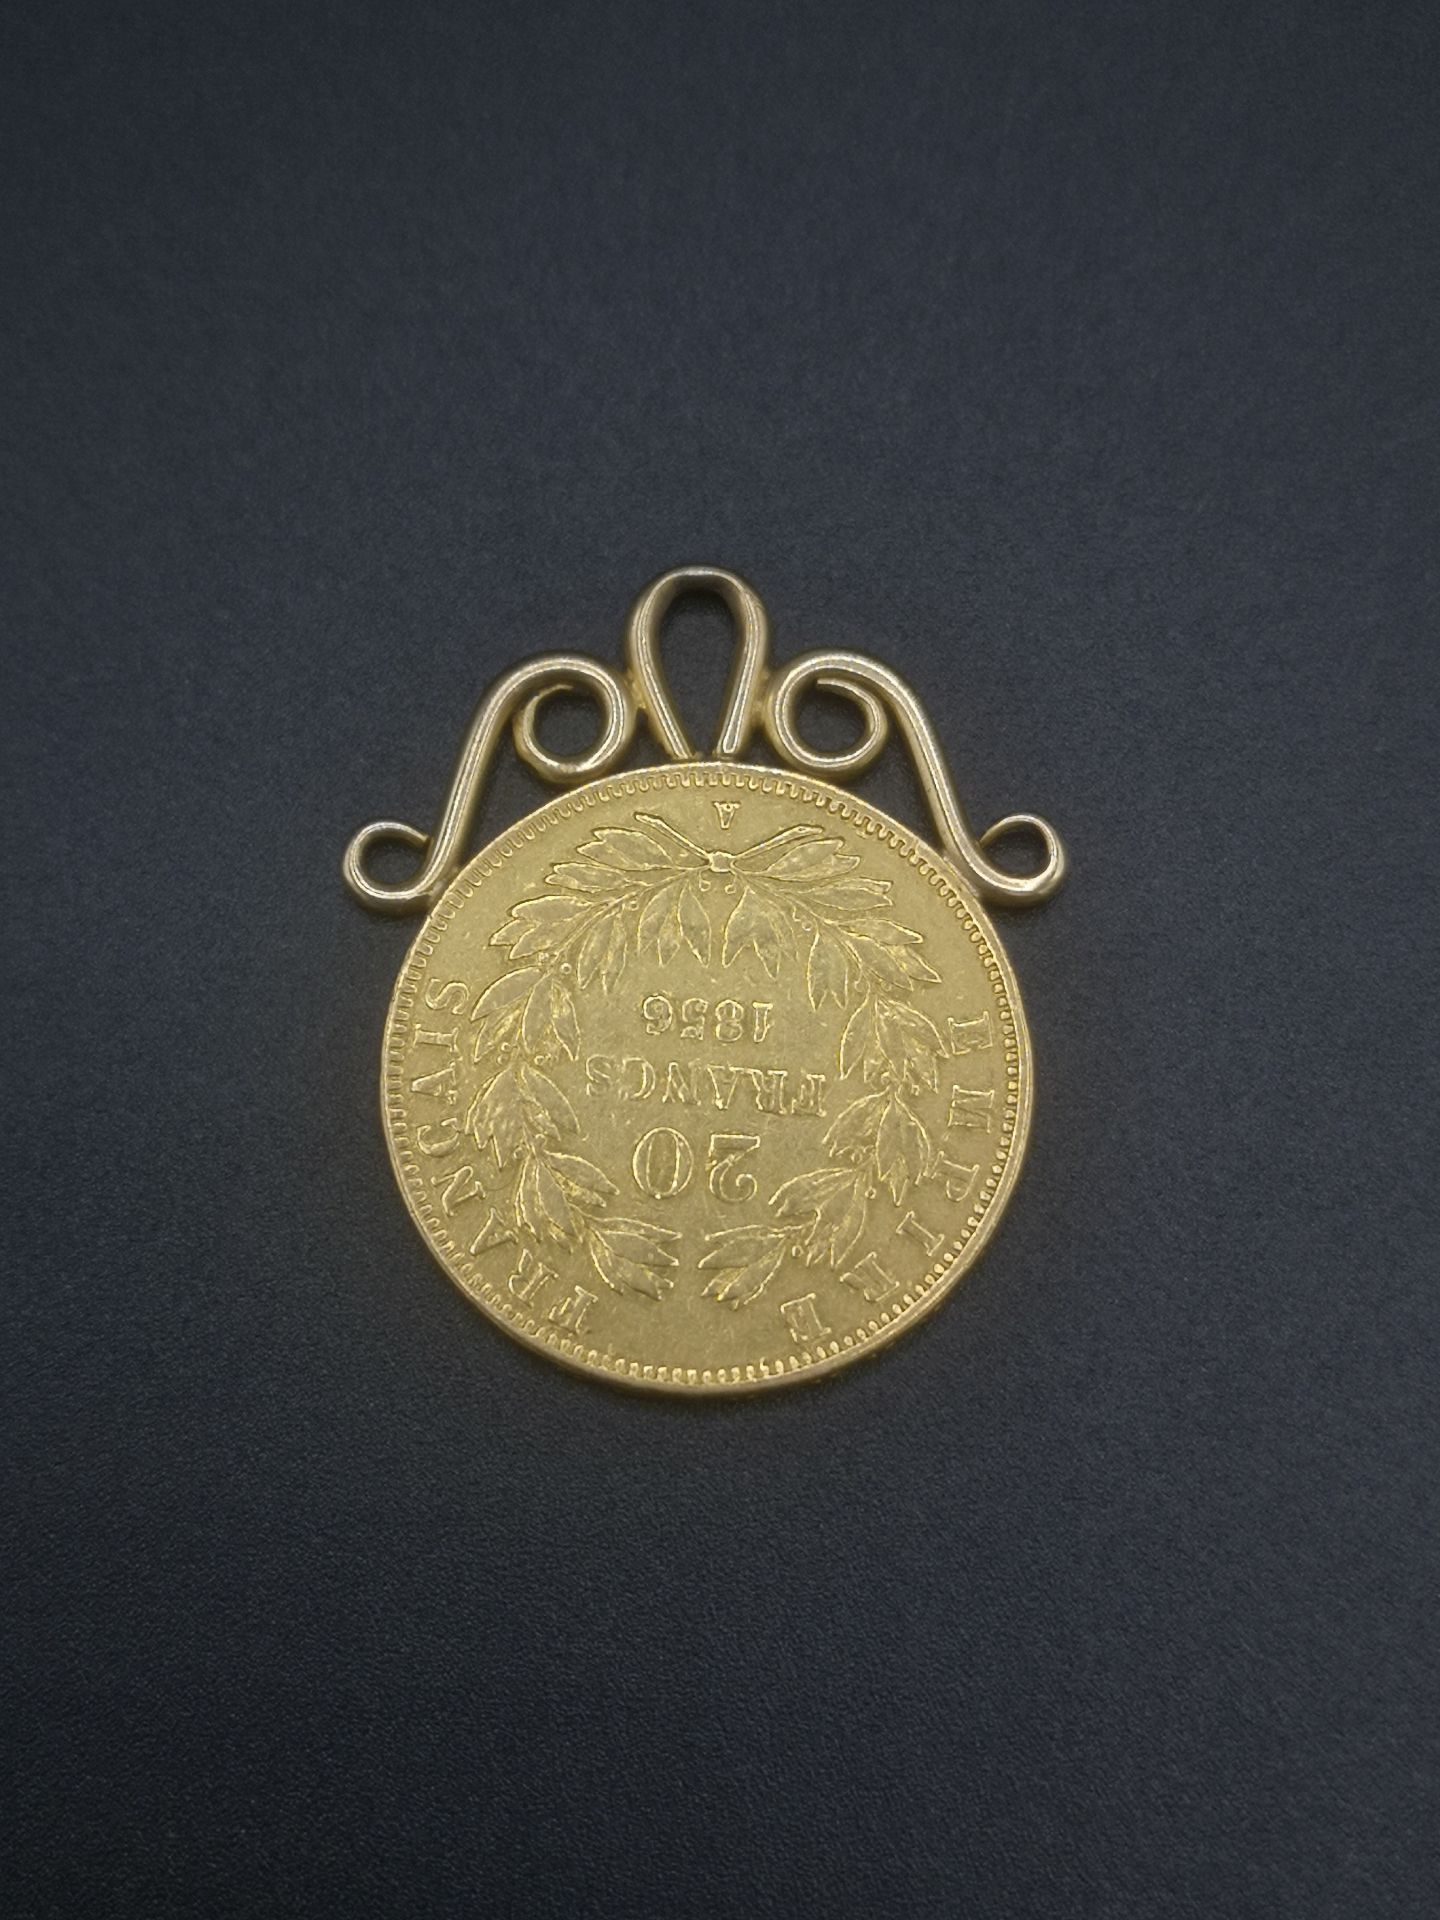 Mounted 20 franc gold coin 1856 - Image 2 of 5